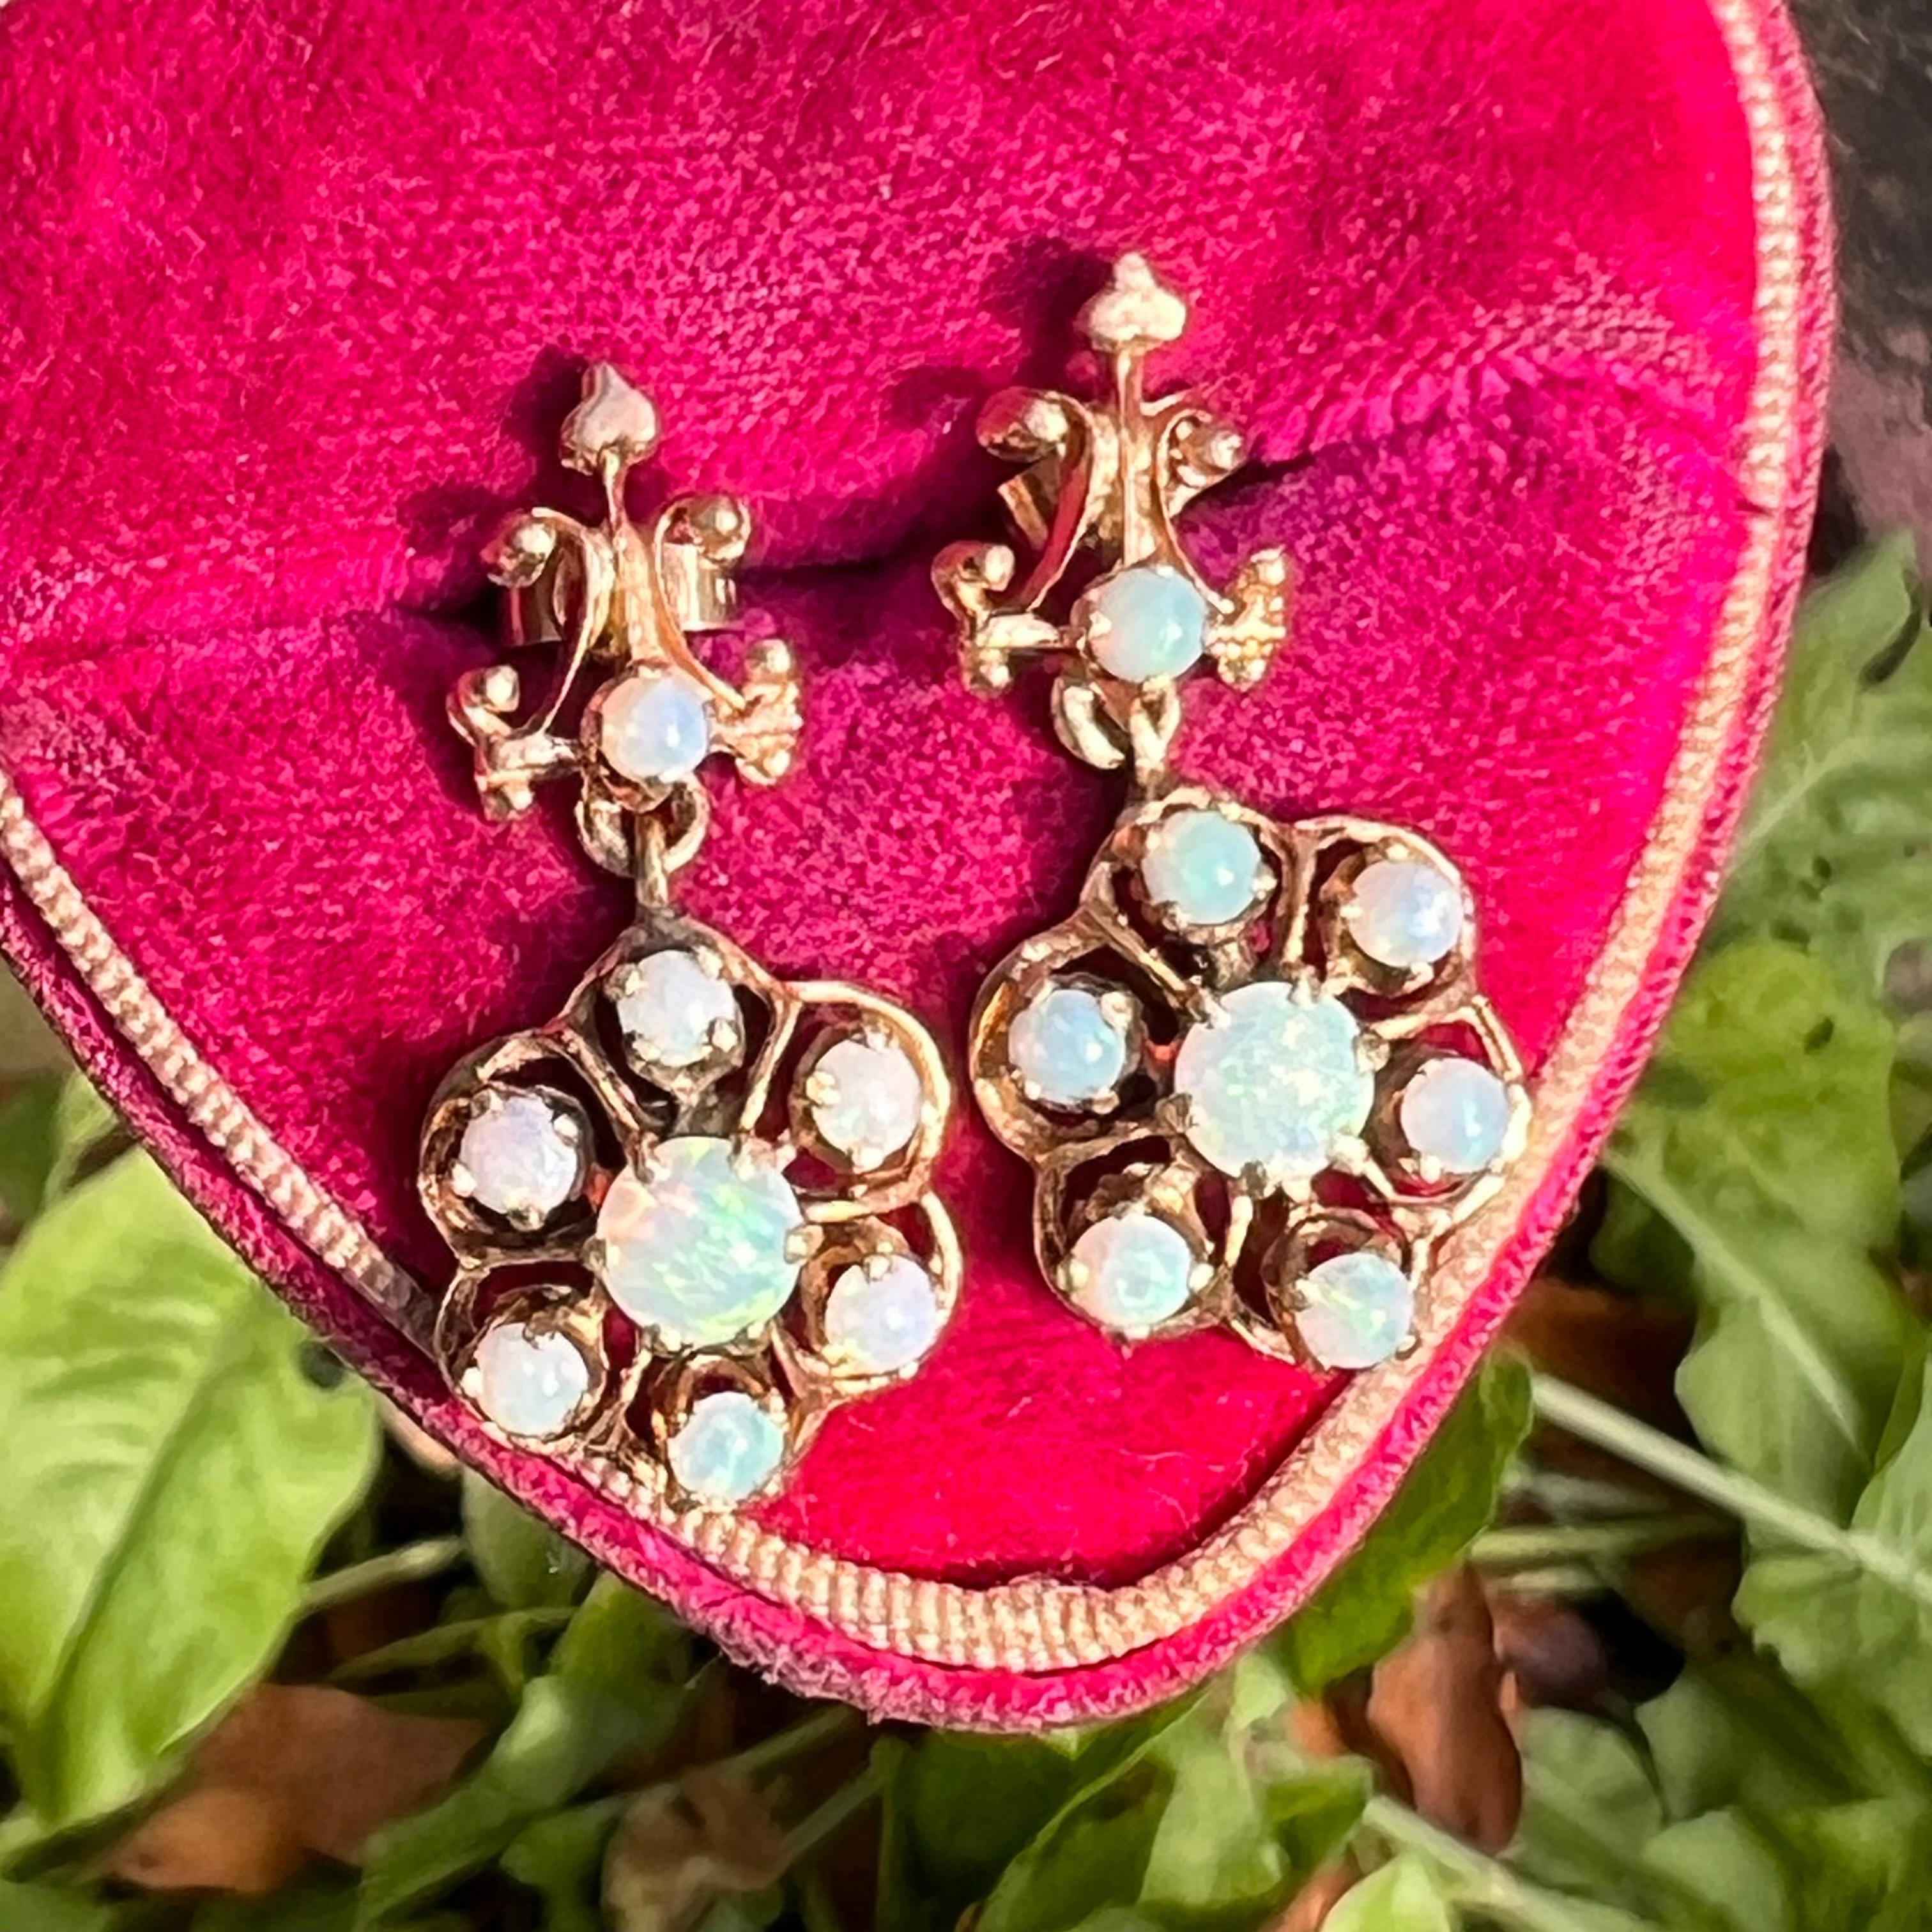 Vintage Victorian revival 14kt solid yellow gold dangle earrings with prong set opals .There are A large  fiery small opals is surrounded by 7 small opals .Earrings are for pireced ears .
Marked 14kt on back side .
Dates mid 20th century 

Materials